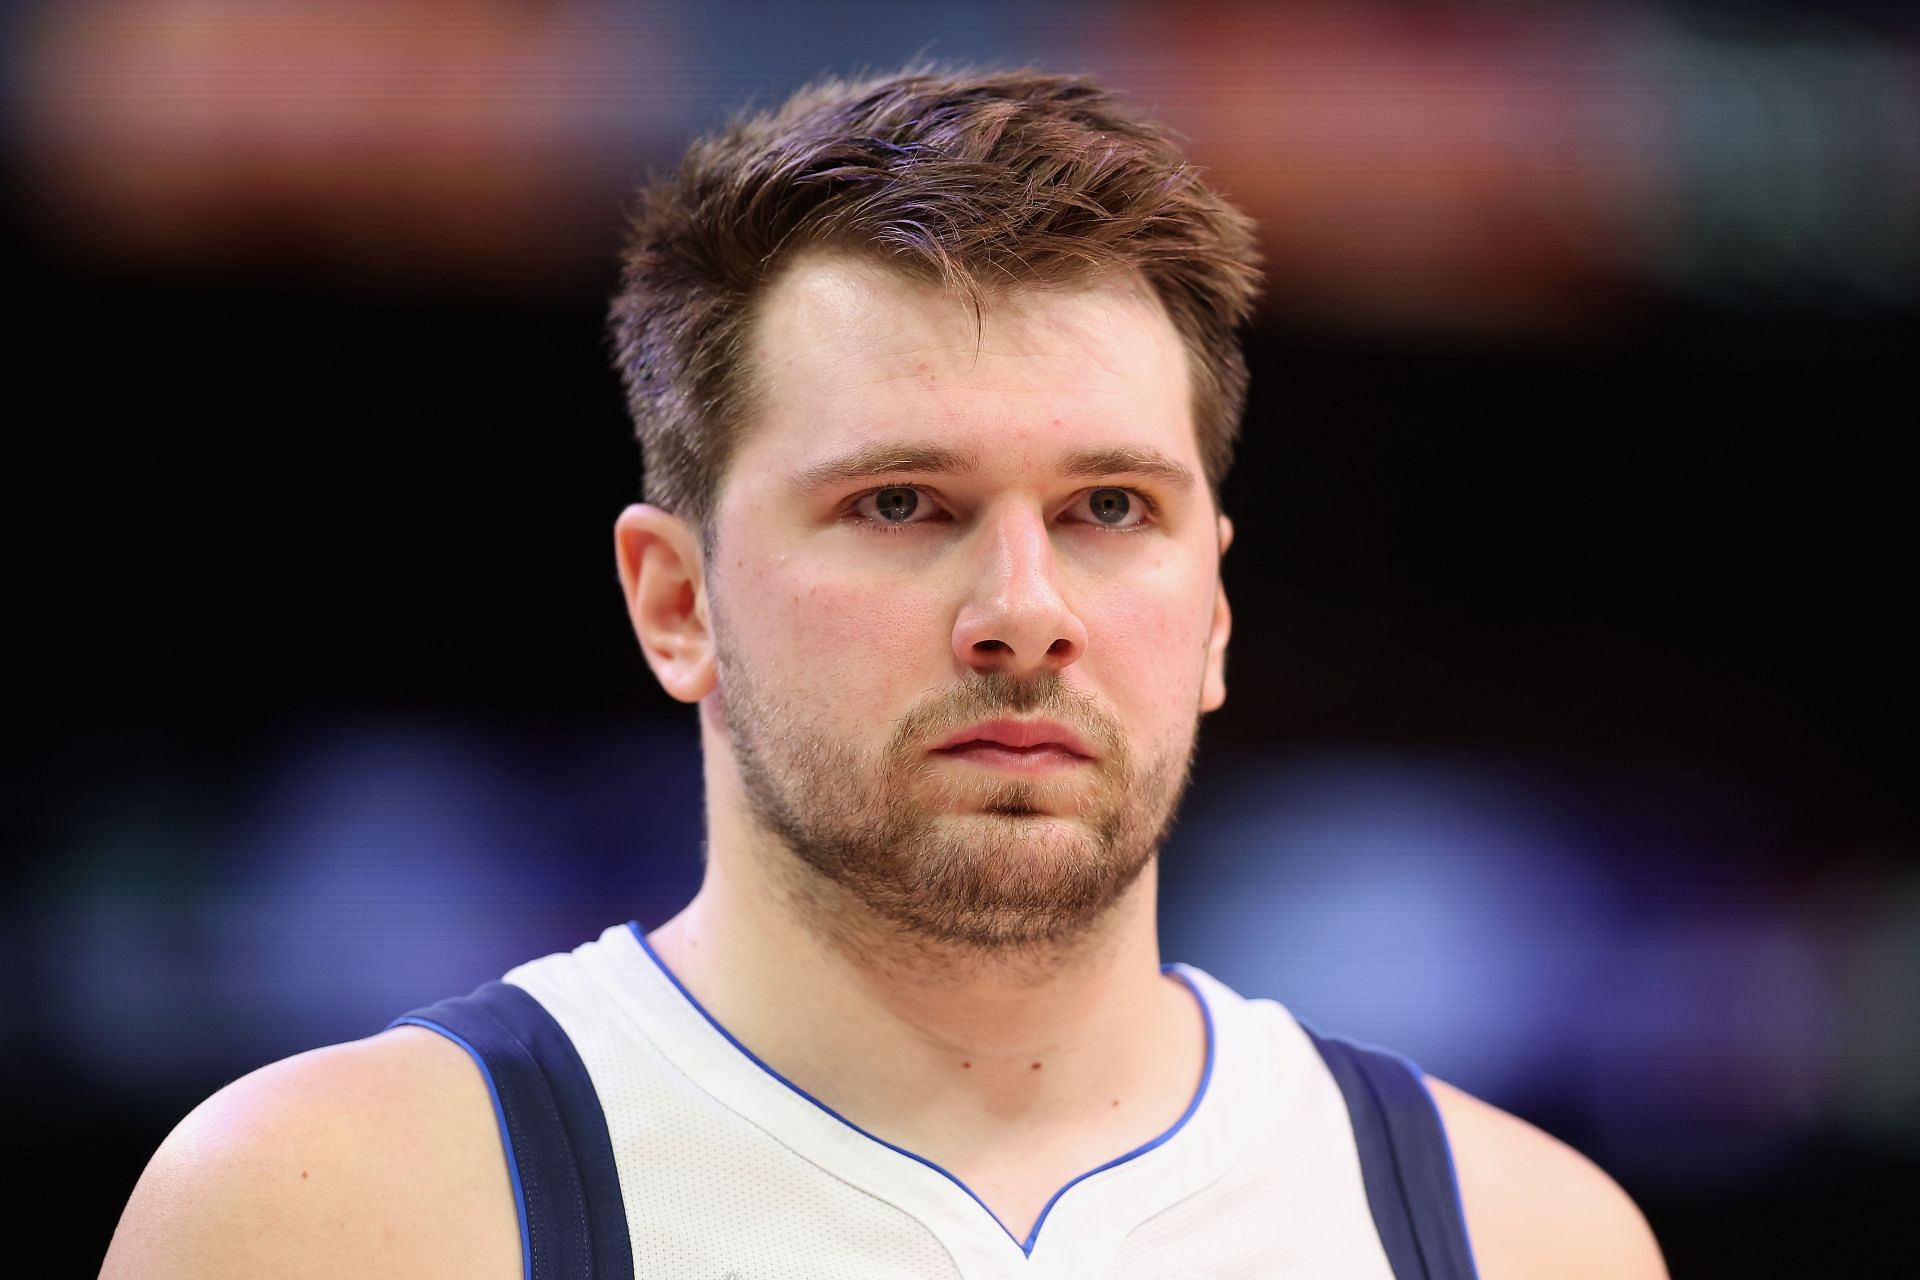 Luka Dončić was held to 43.5% from the field and 25.0% from the three-point line.